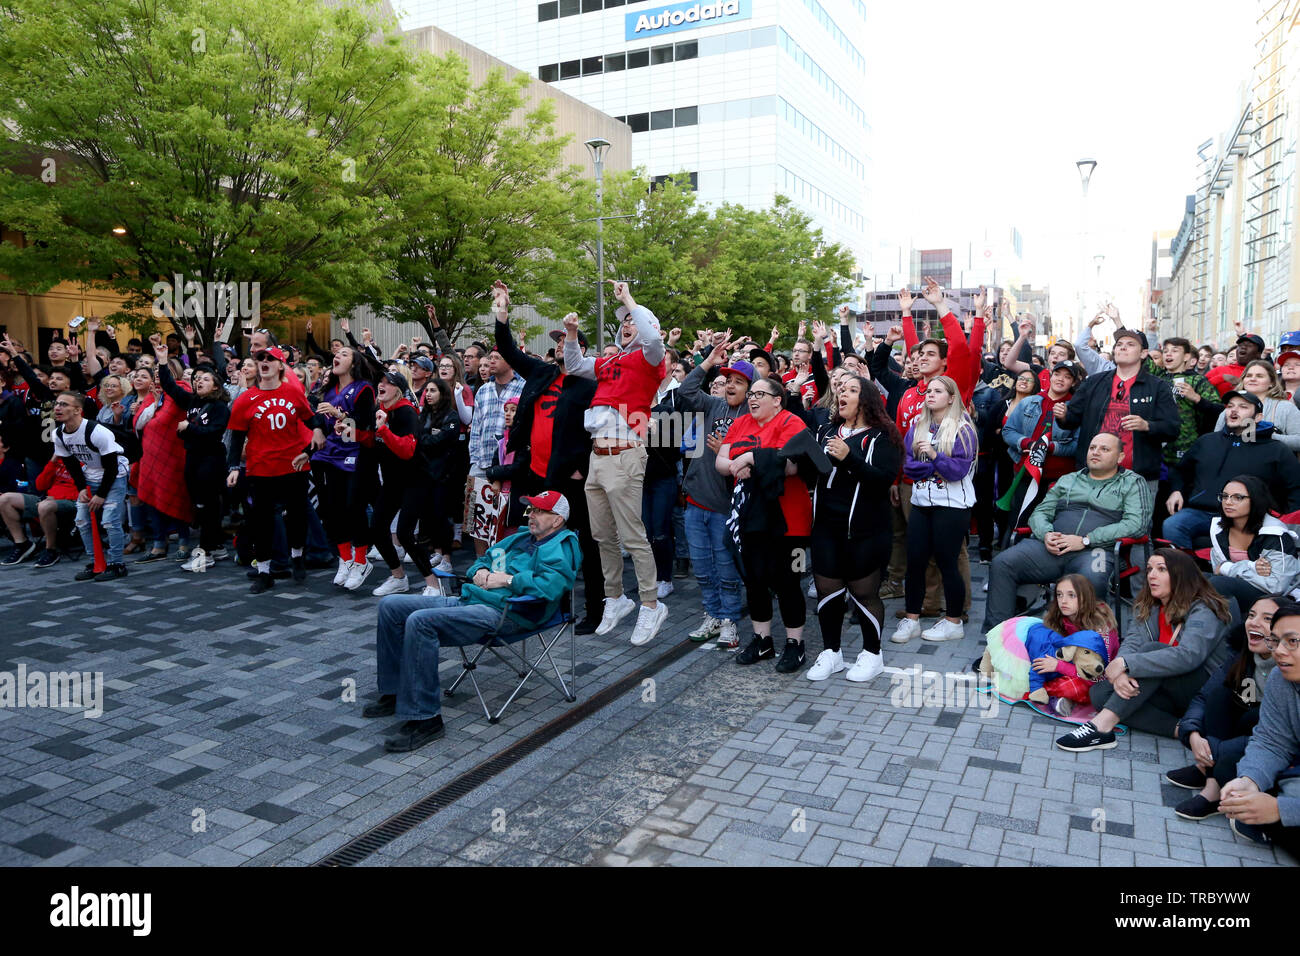 Fans sand head down to Jurassic Park in Downtown London Ontario to Cheer on the Toronto Raptors for Game 2 of the NBA Finals. Stock Photo